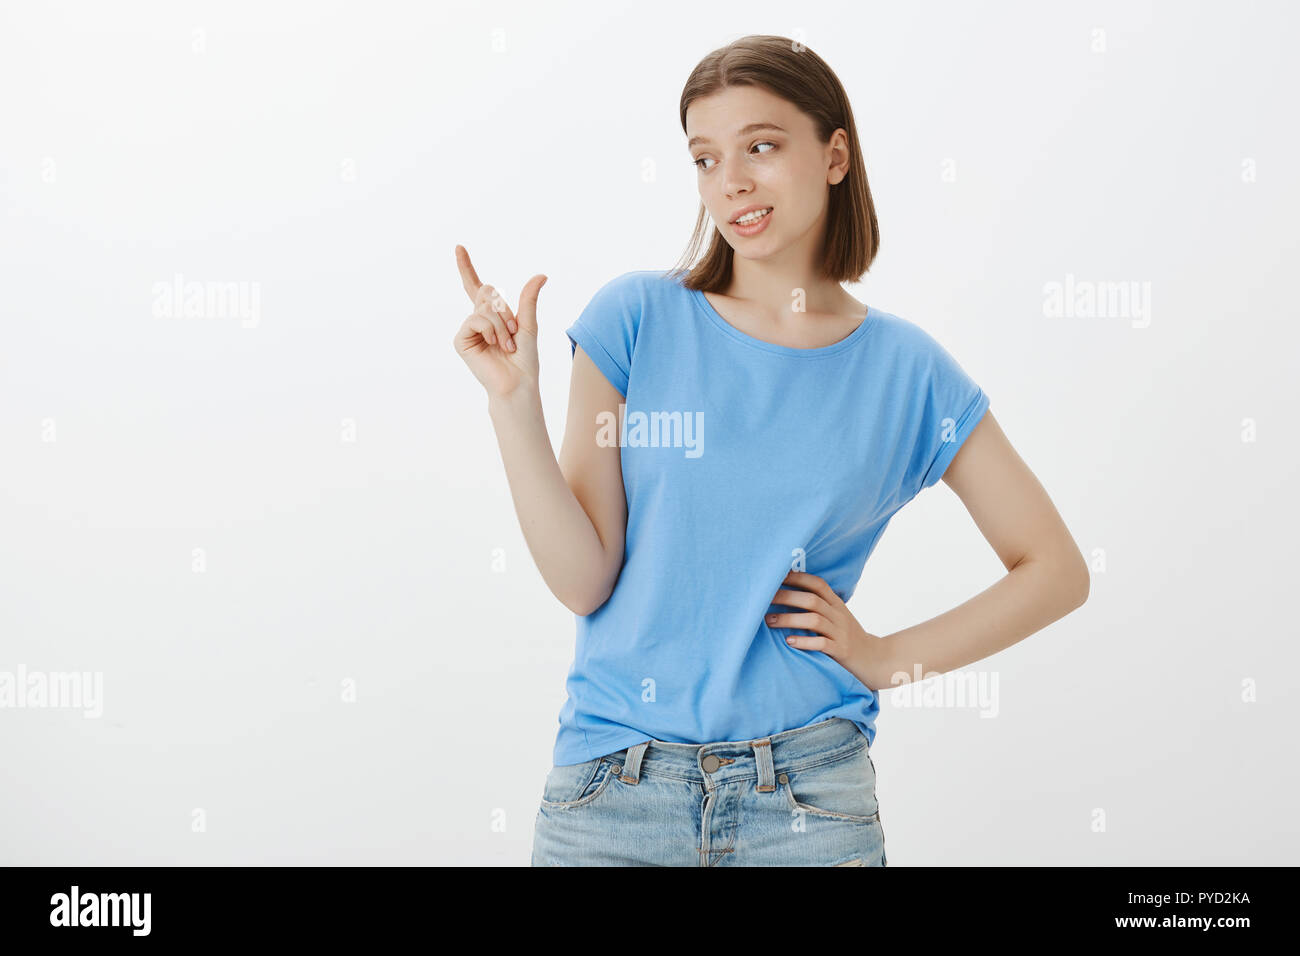 Unimpressive size for me. Portrait of scorning good-looking confident woman in blue t-shirt, holding hand on hip and looking at arm while shaping small or tiny thing, being unimpressed Stock Photo